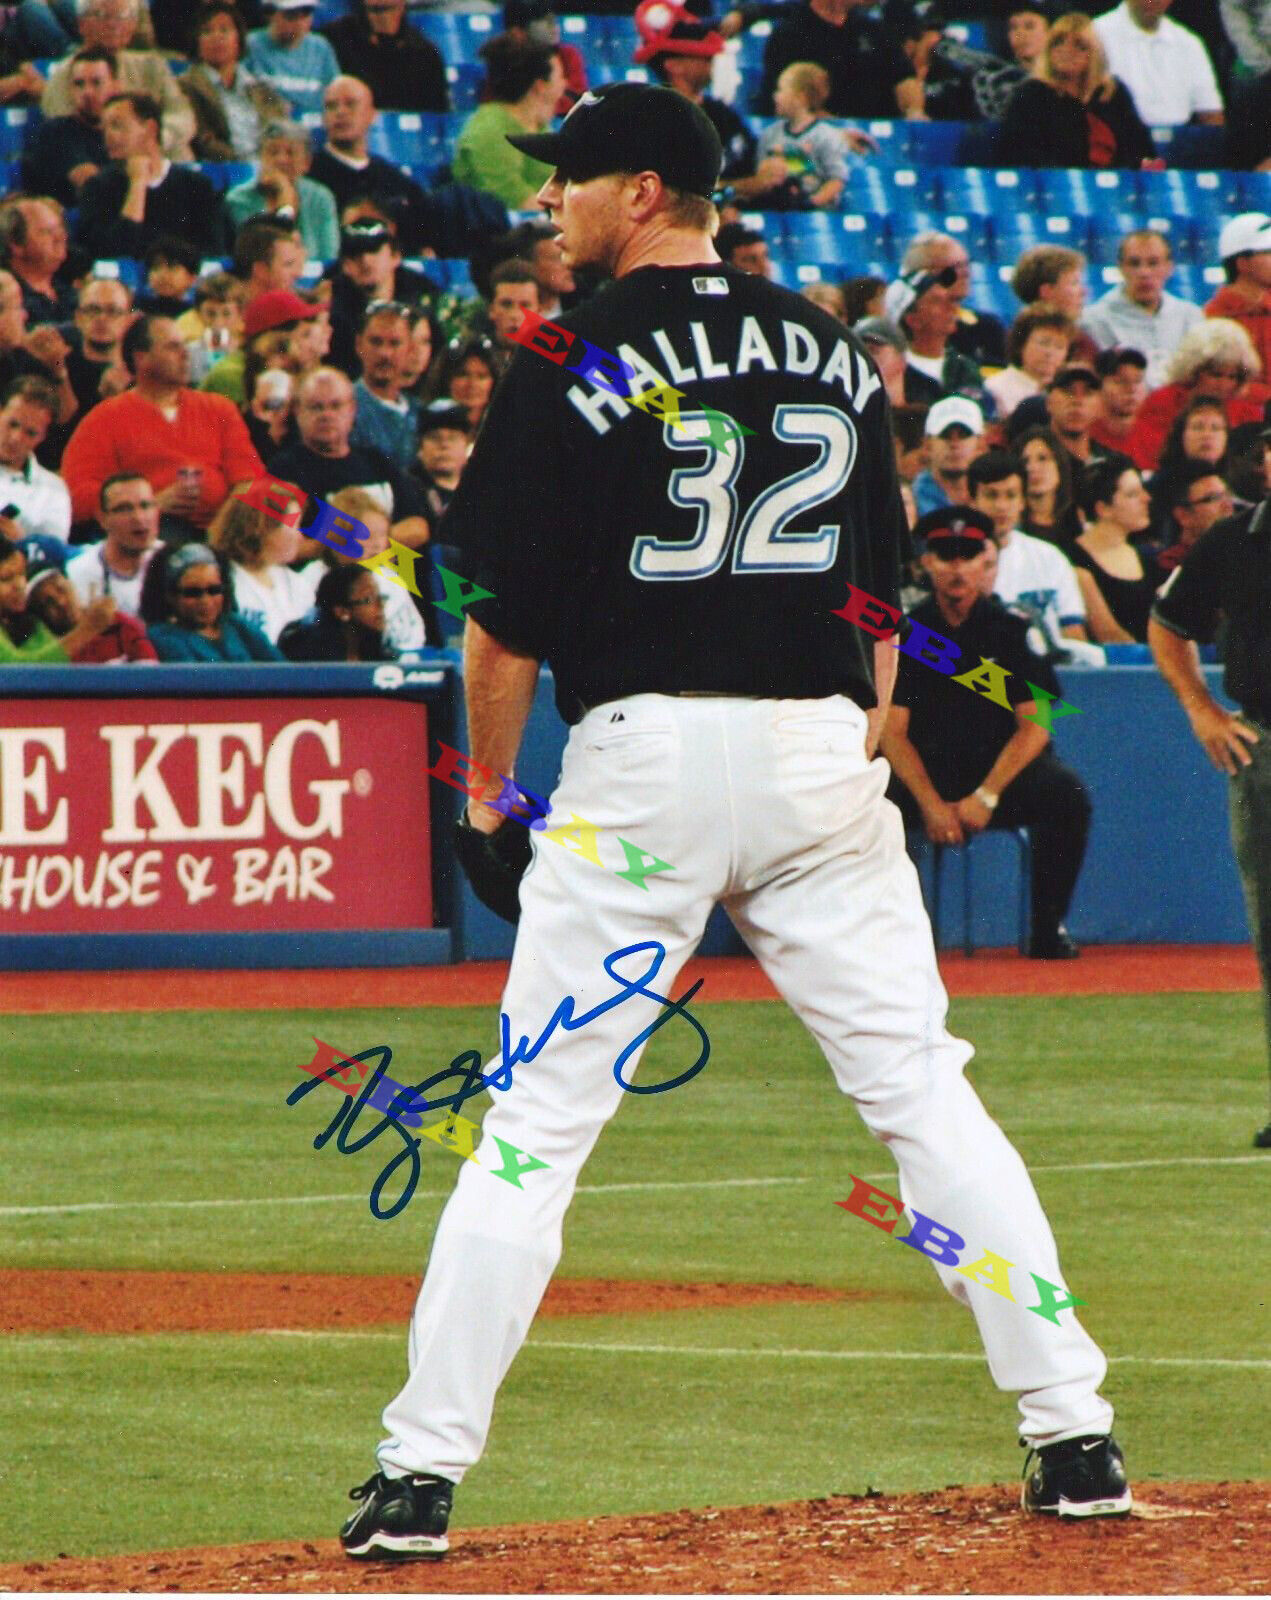 TORONTO BLUE JAYS ROY HALLADAY Signed Autographed 8x10 Photo Poster painting Reprint